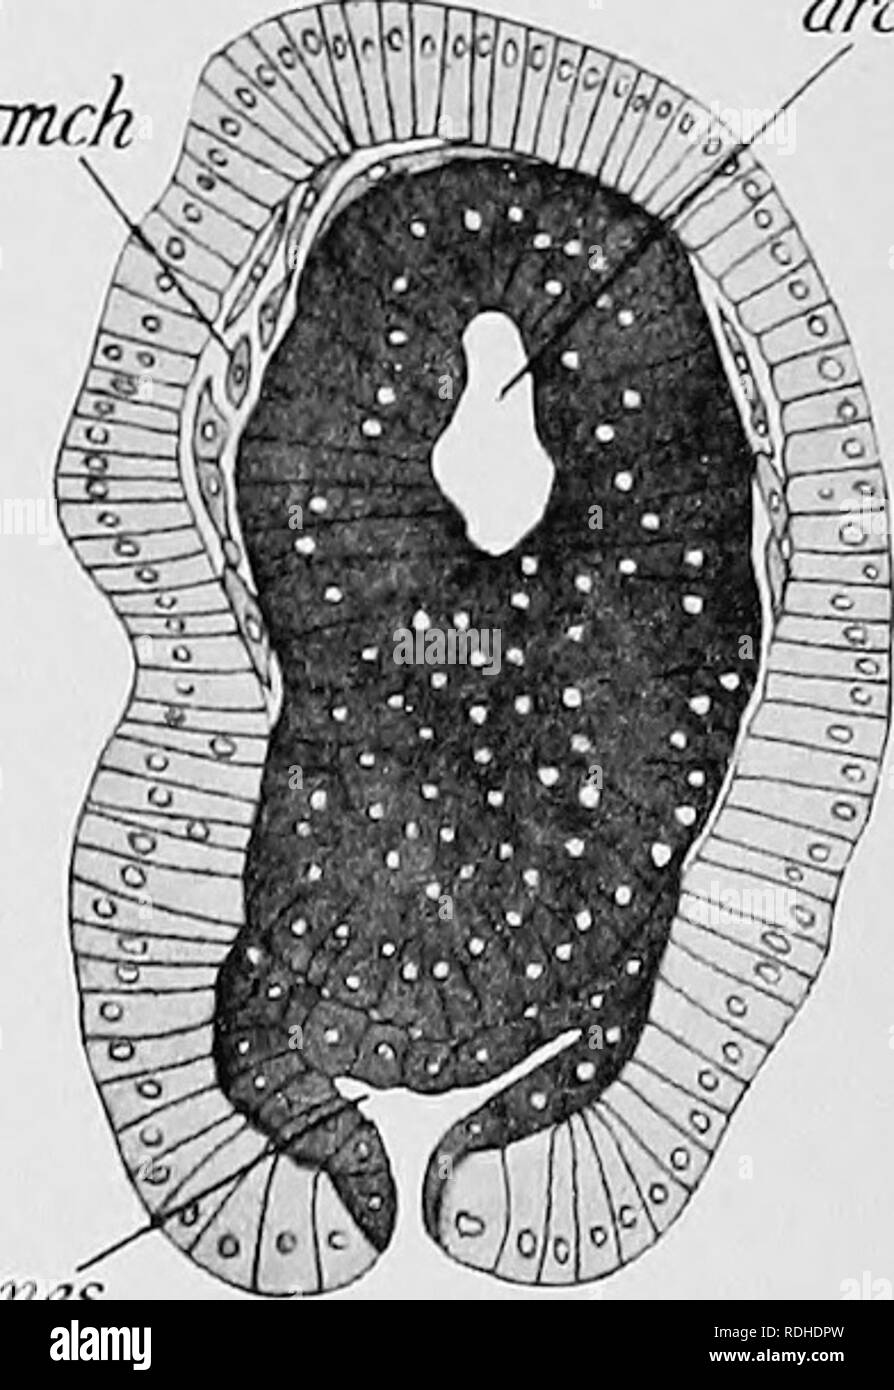 . Text-book of embryology. Embryology. Fig. 309.—Diagramm.itic frontal section of tlie Actinotrocha larva of Phoronis [sp^) captured near Ceylon, (After Goodrich.) ap, apical plate ; colx, collar coelom ; int, intestine ; mtr, tentacles of the metatroch ; nepk, nephridium; oes, oesophagus; pr.hs, prae-oral blood space ; s.n.p, subneural pit; sol, solenocytes of the nephridia; fit, stomach ; tr.c, trunk coelom ; t.tr, telotroch. mes Flu. 310.—Longitudinal hori- zontal section of the embryo of an Australian species of Phoronis. (After Caldwell.) arch, arclienteron; mch, mesen- chyme cells ; itic Stock Photo